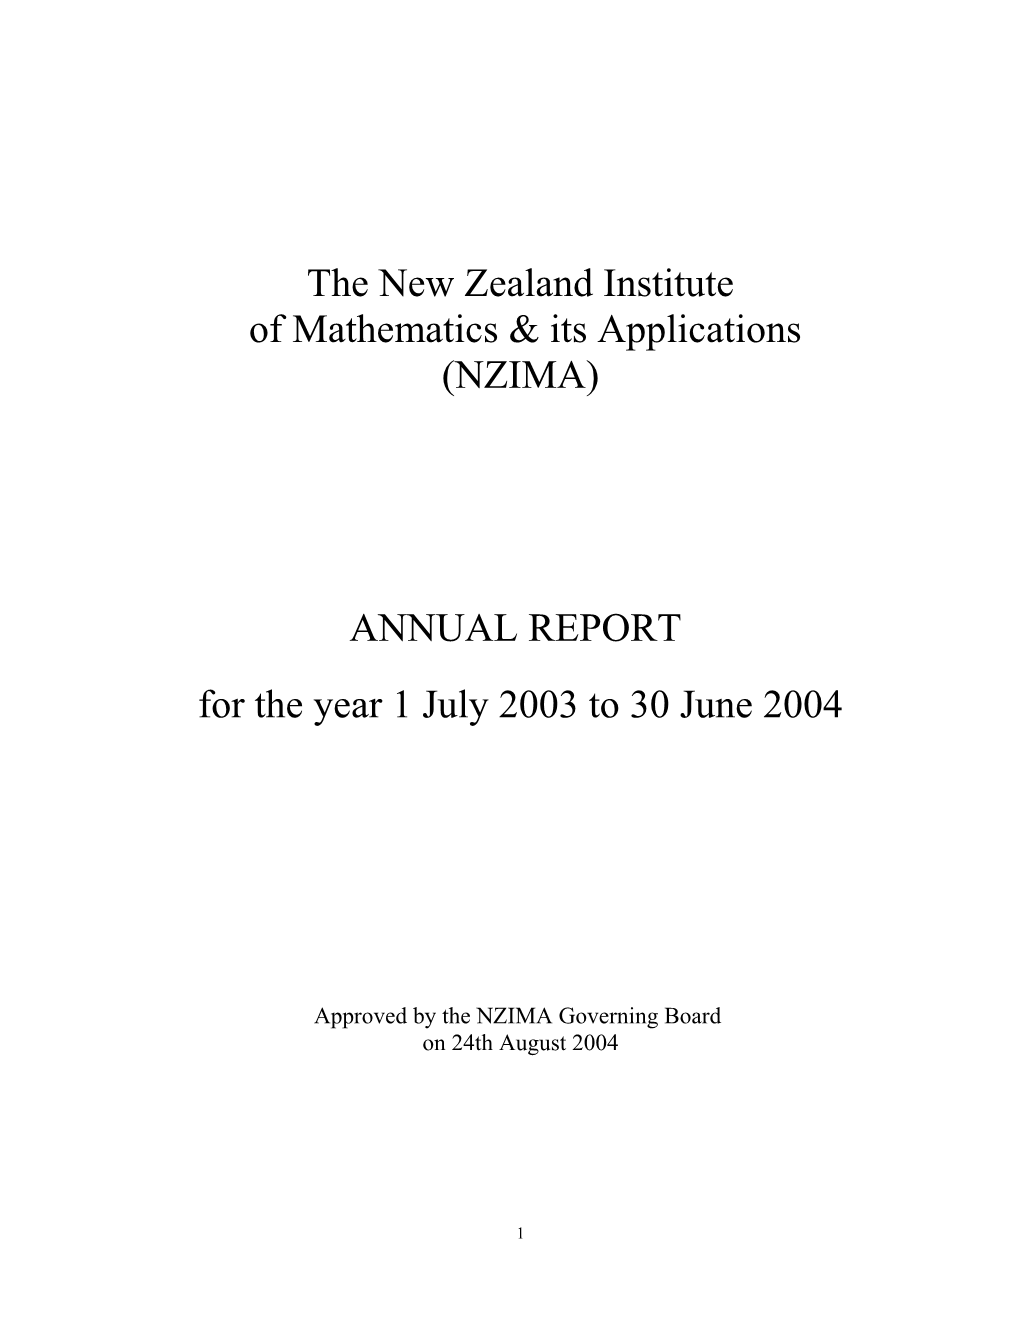 The New Zealand Institute